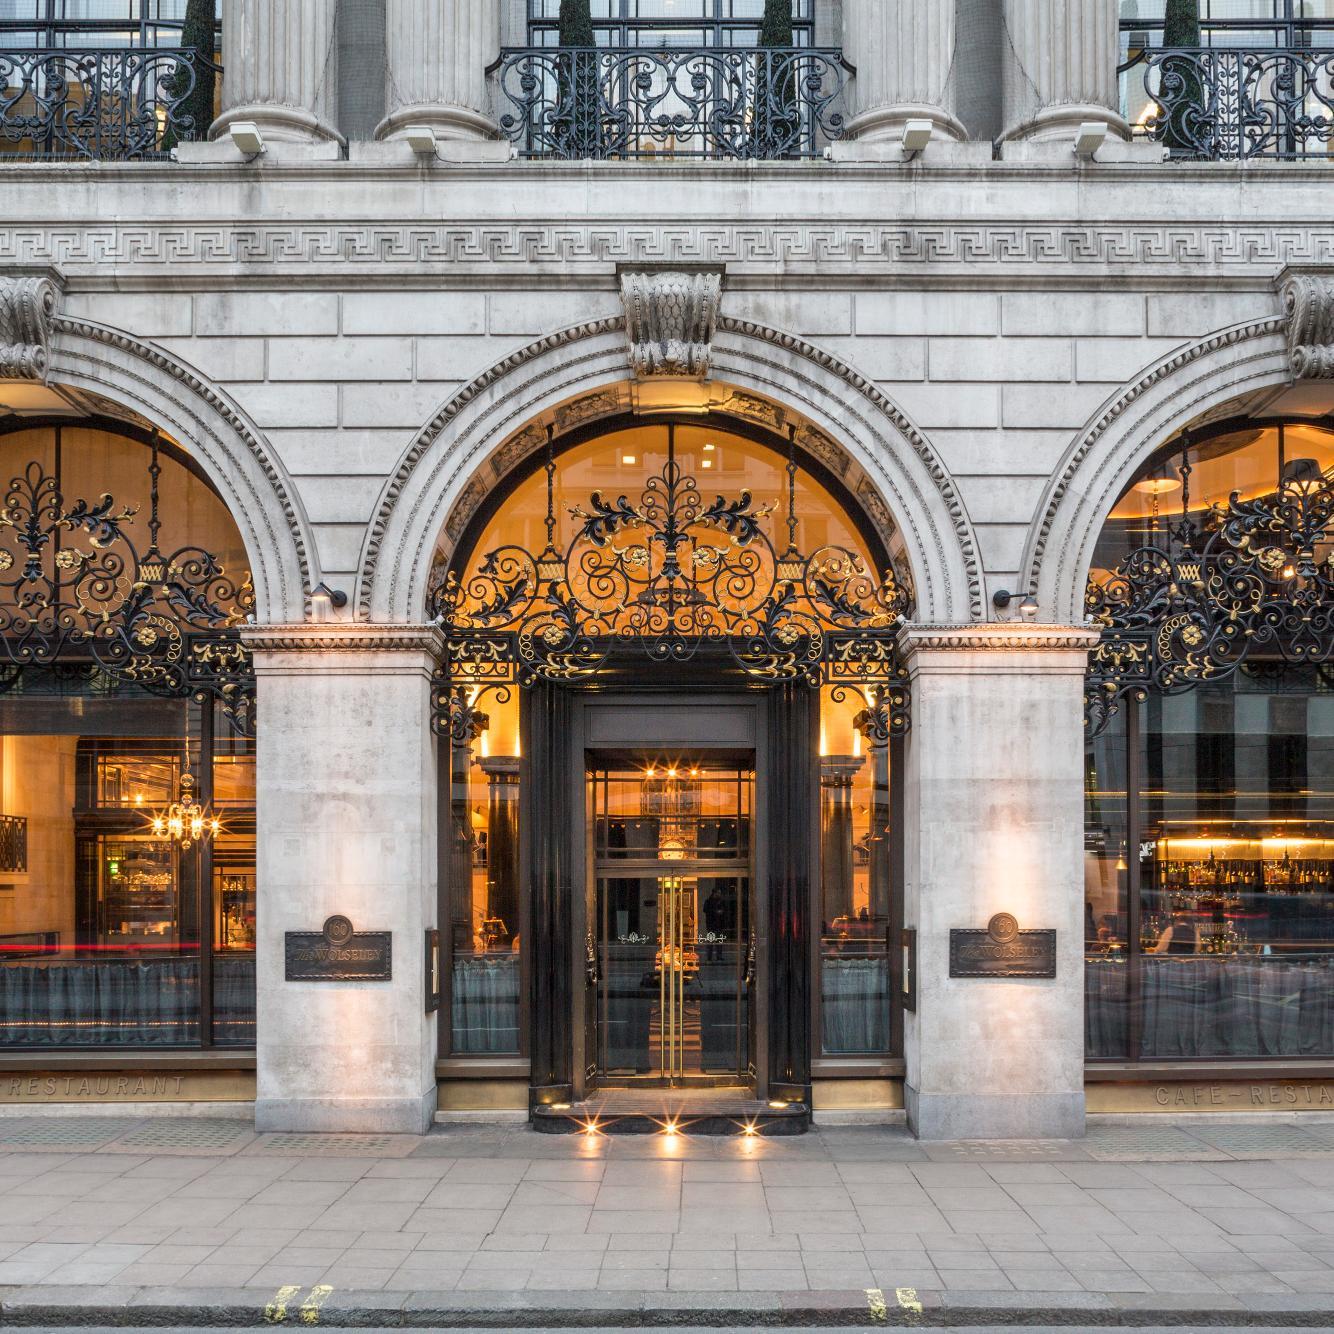 Located on Piccadilly, The Wolseley is an all-day cafe-restaurant in the Grand European style, part of @thewolseleyhg